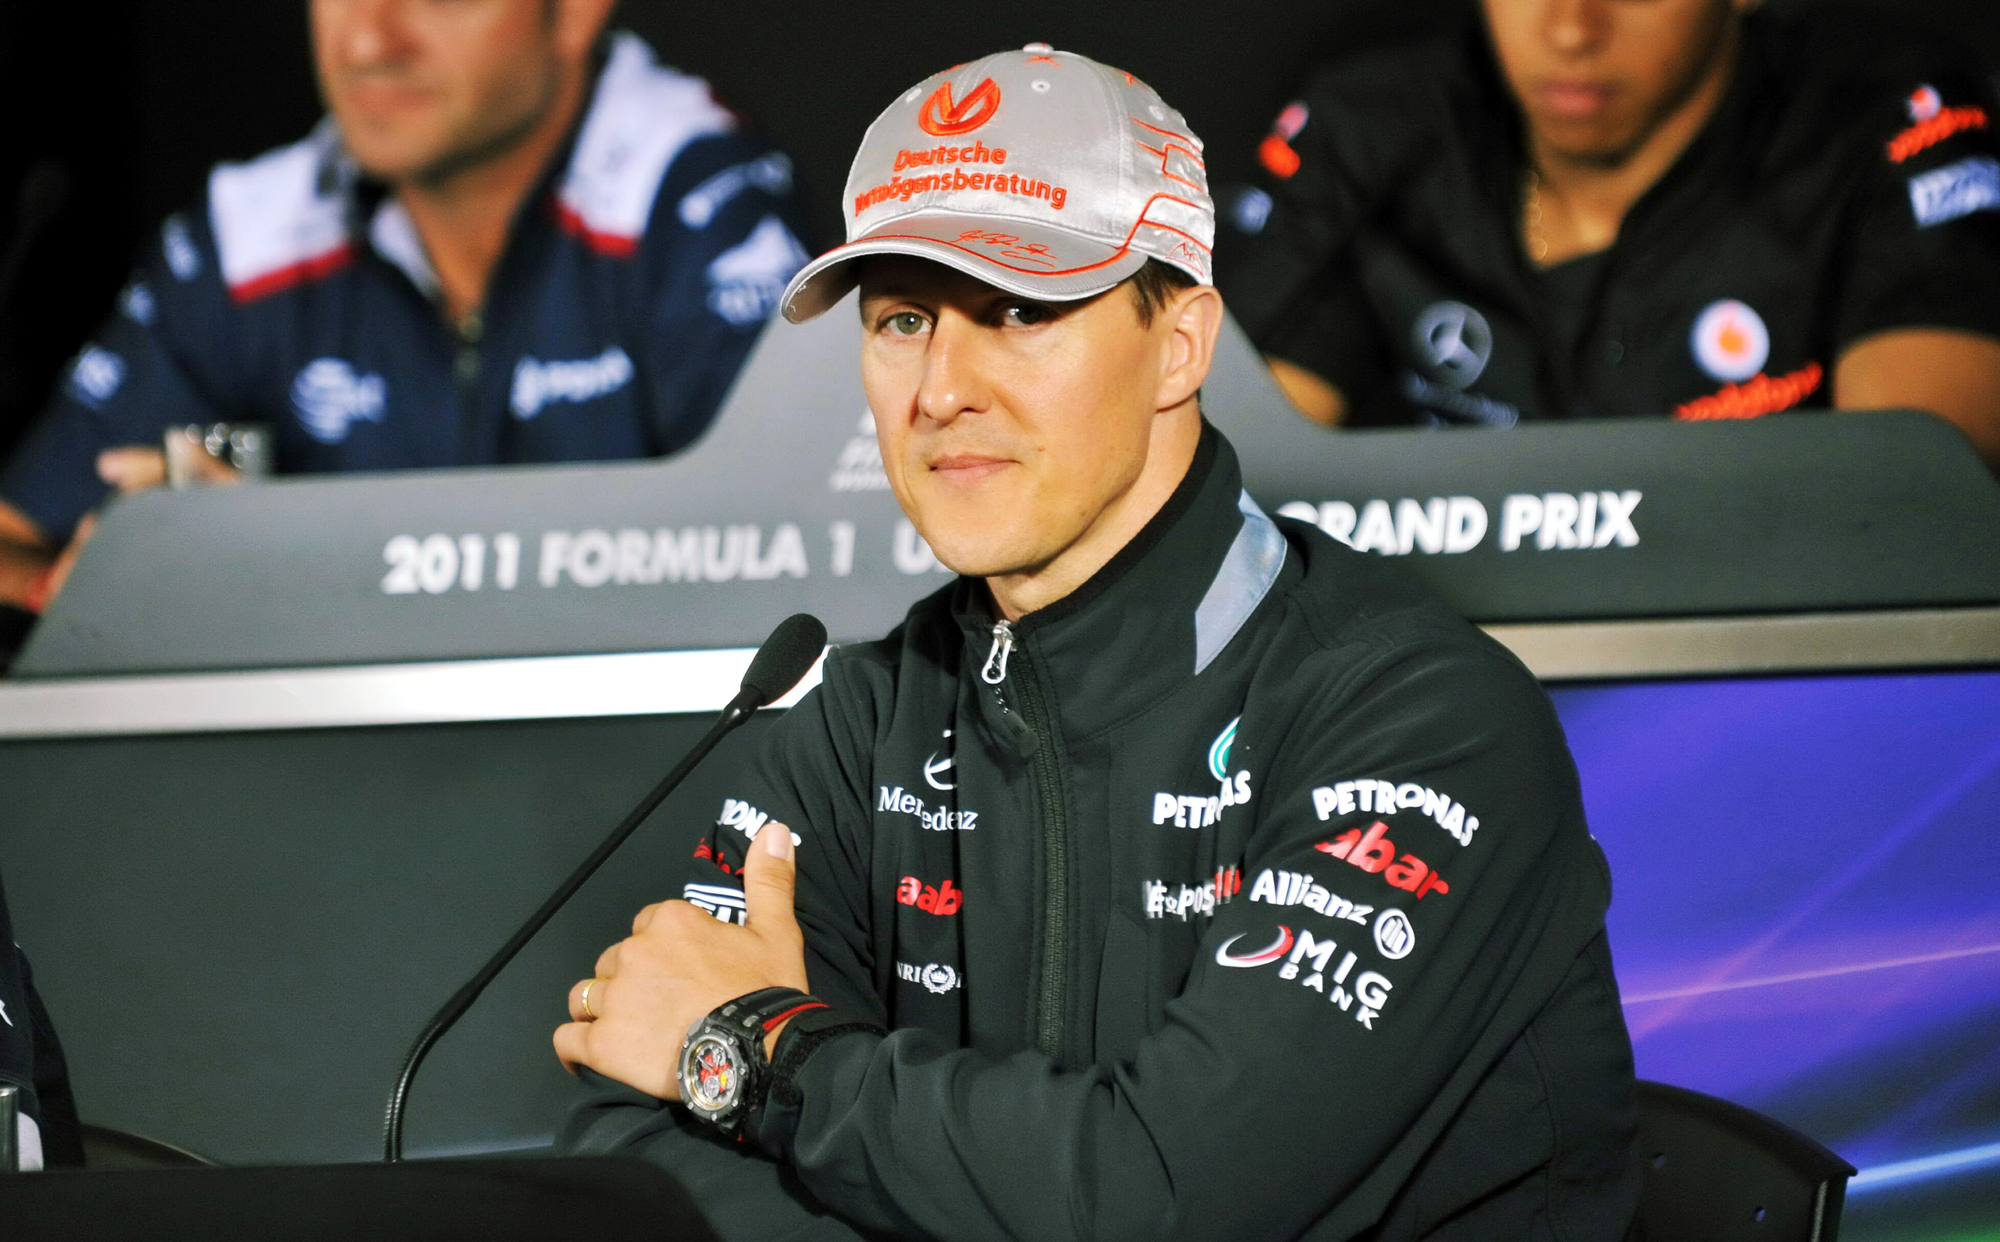 F1 Drivers Gear Up For Chinese Grand Prix